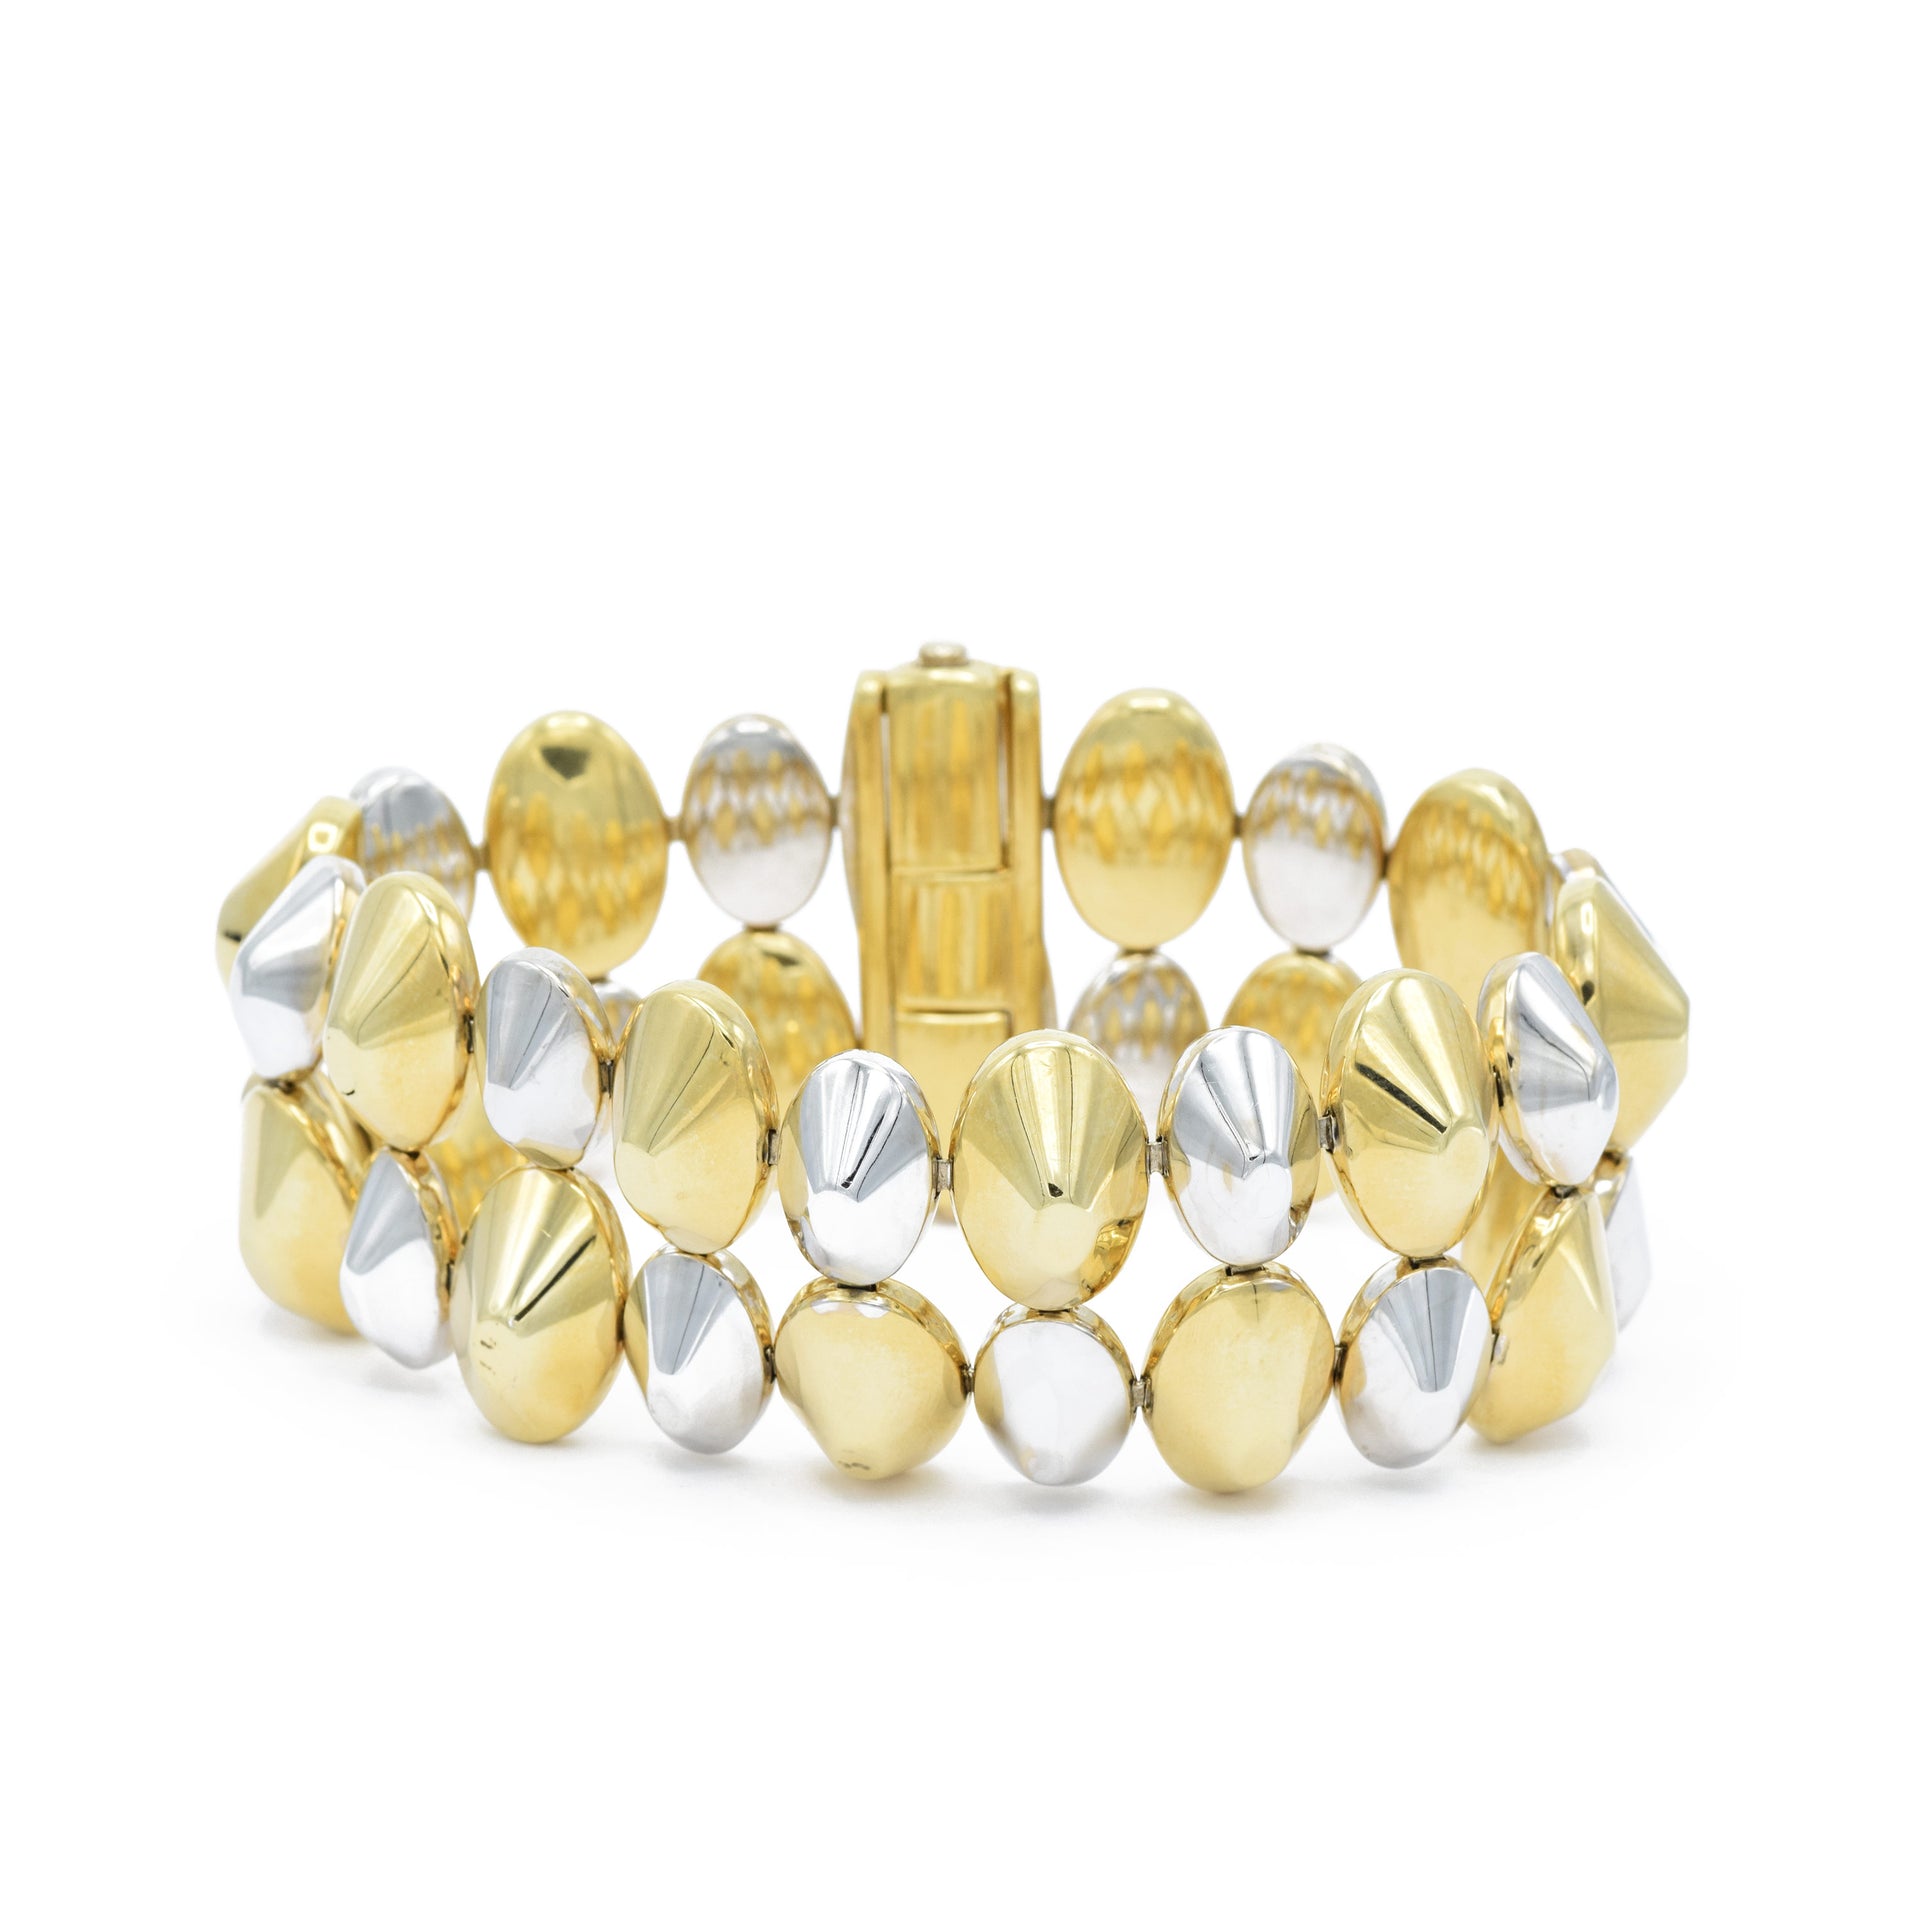 Estate 18KT White And Yellow Gold “Chimento” Bracelet